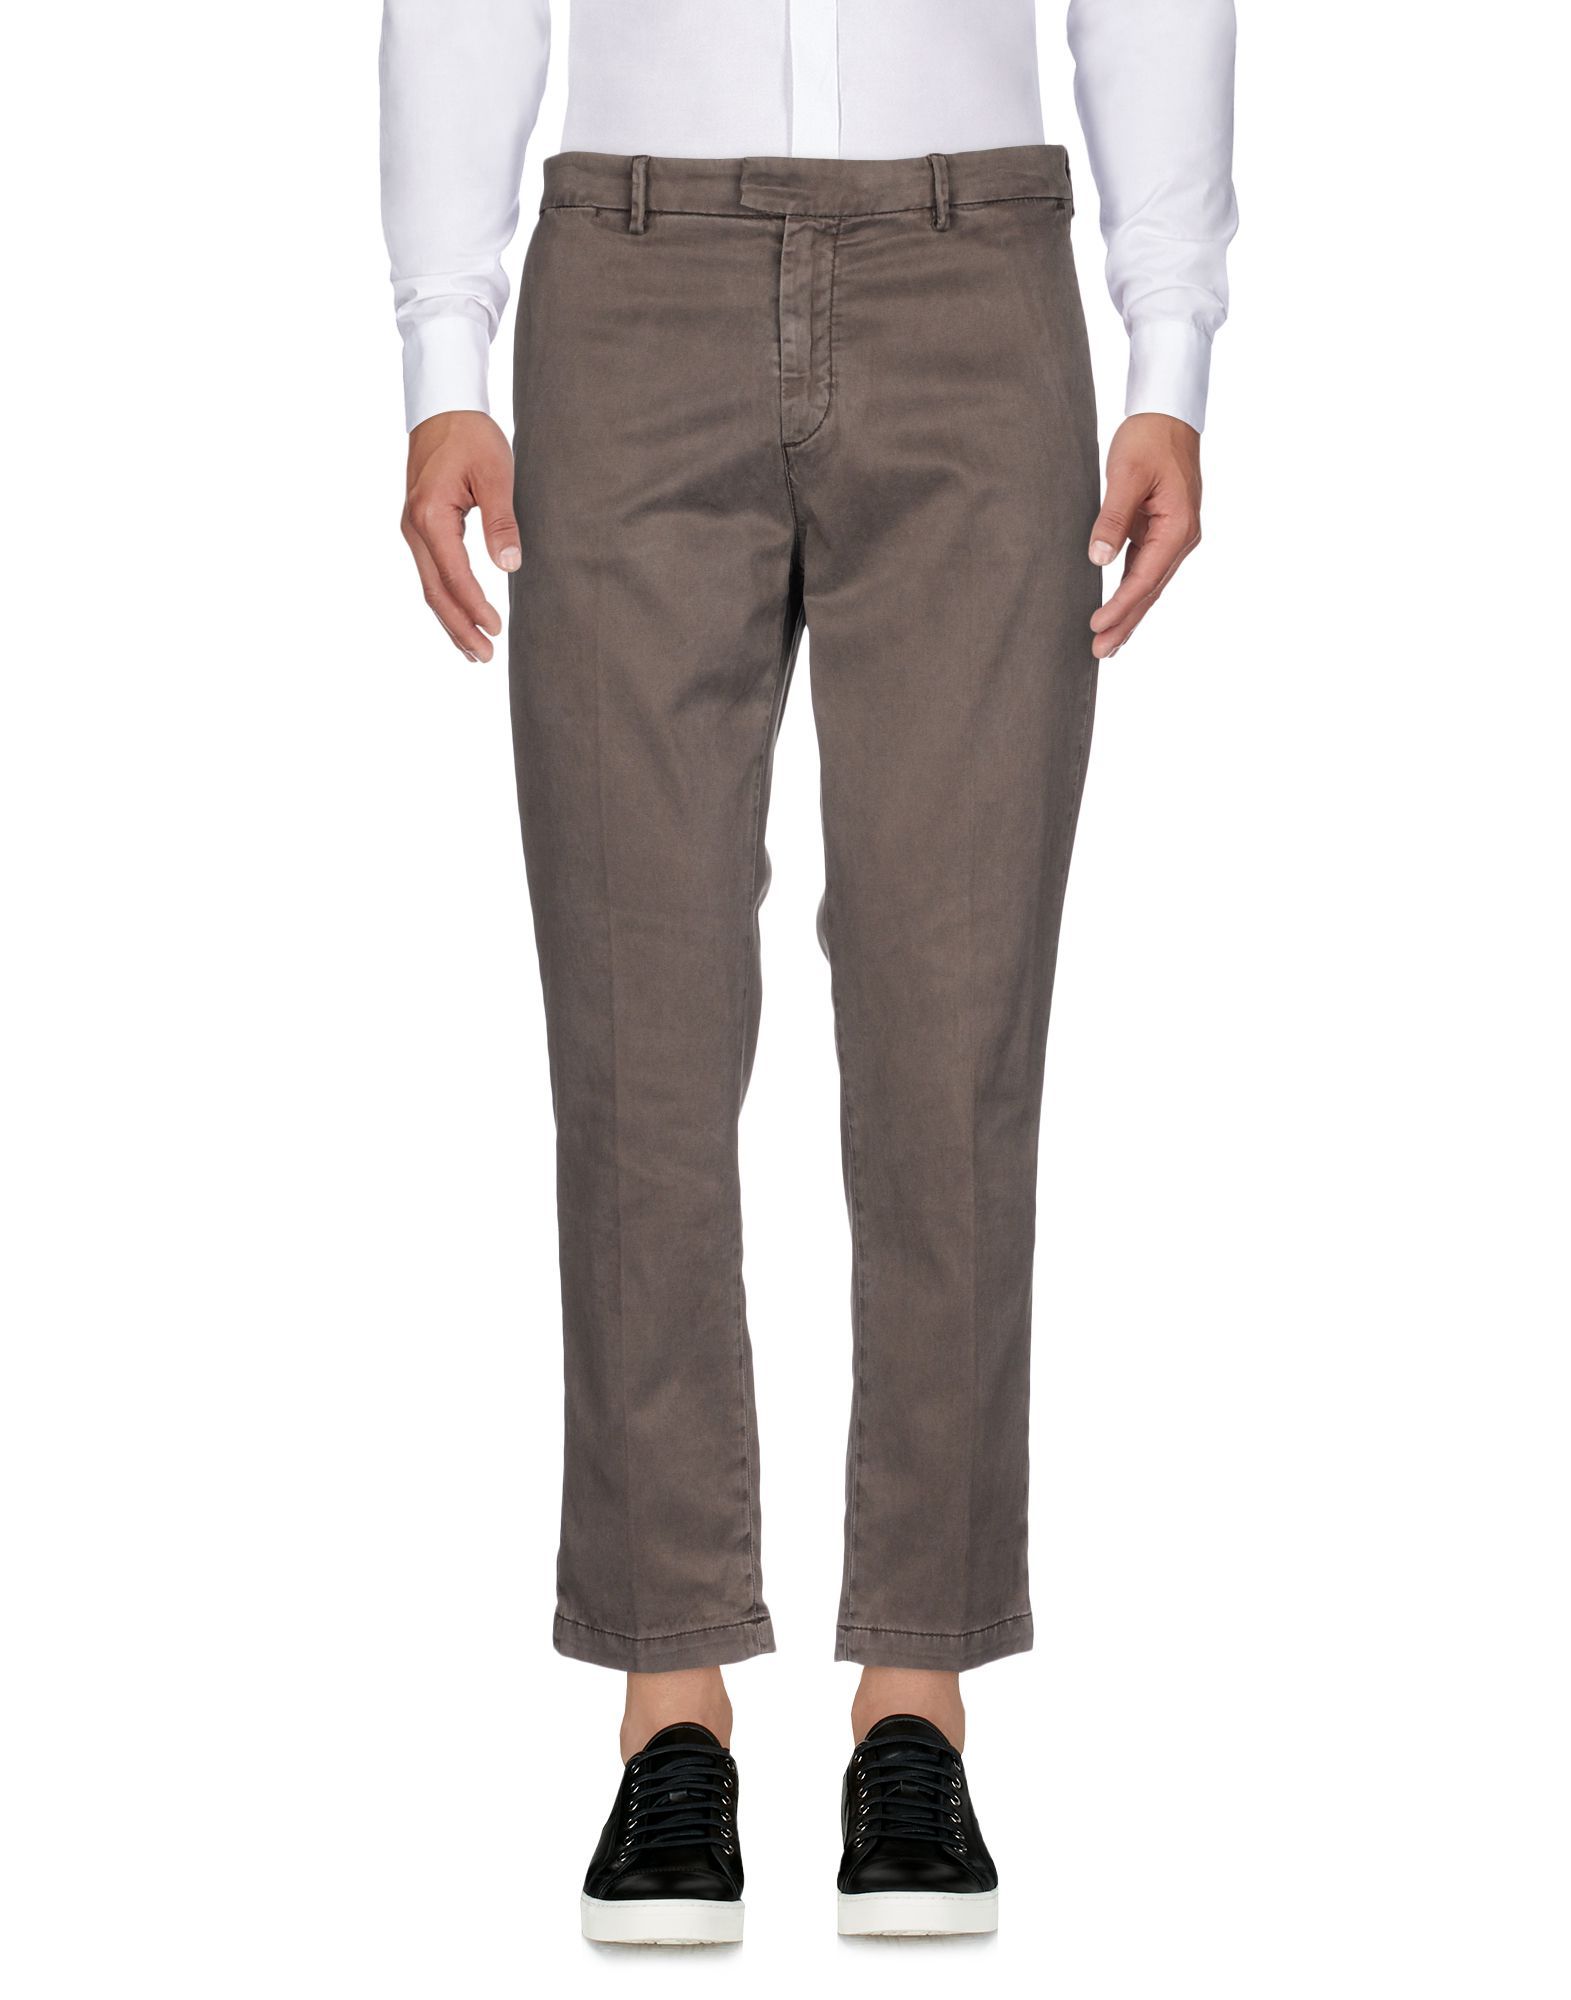 Plain weave<br>Logo<br>Solid colour<br>Mid Rise<br>Tapered leg<br>Regular fit<br>Hook-and-bar, zip<br>Multipockets<br>Chinos<br>